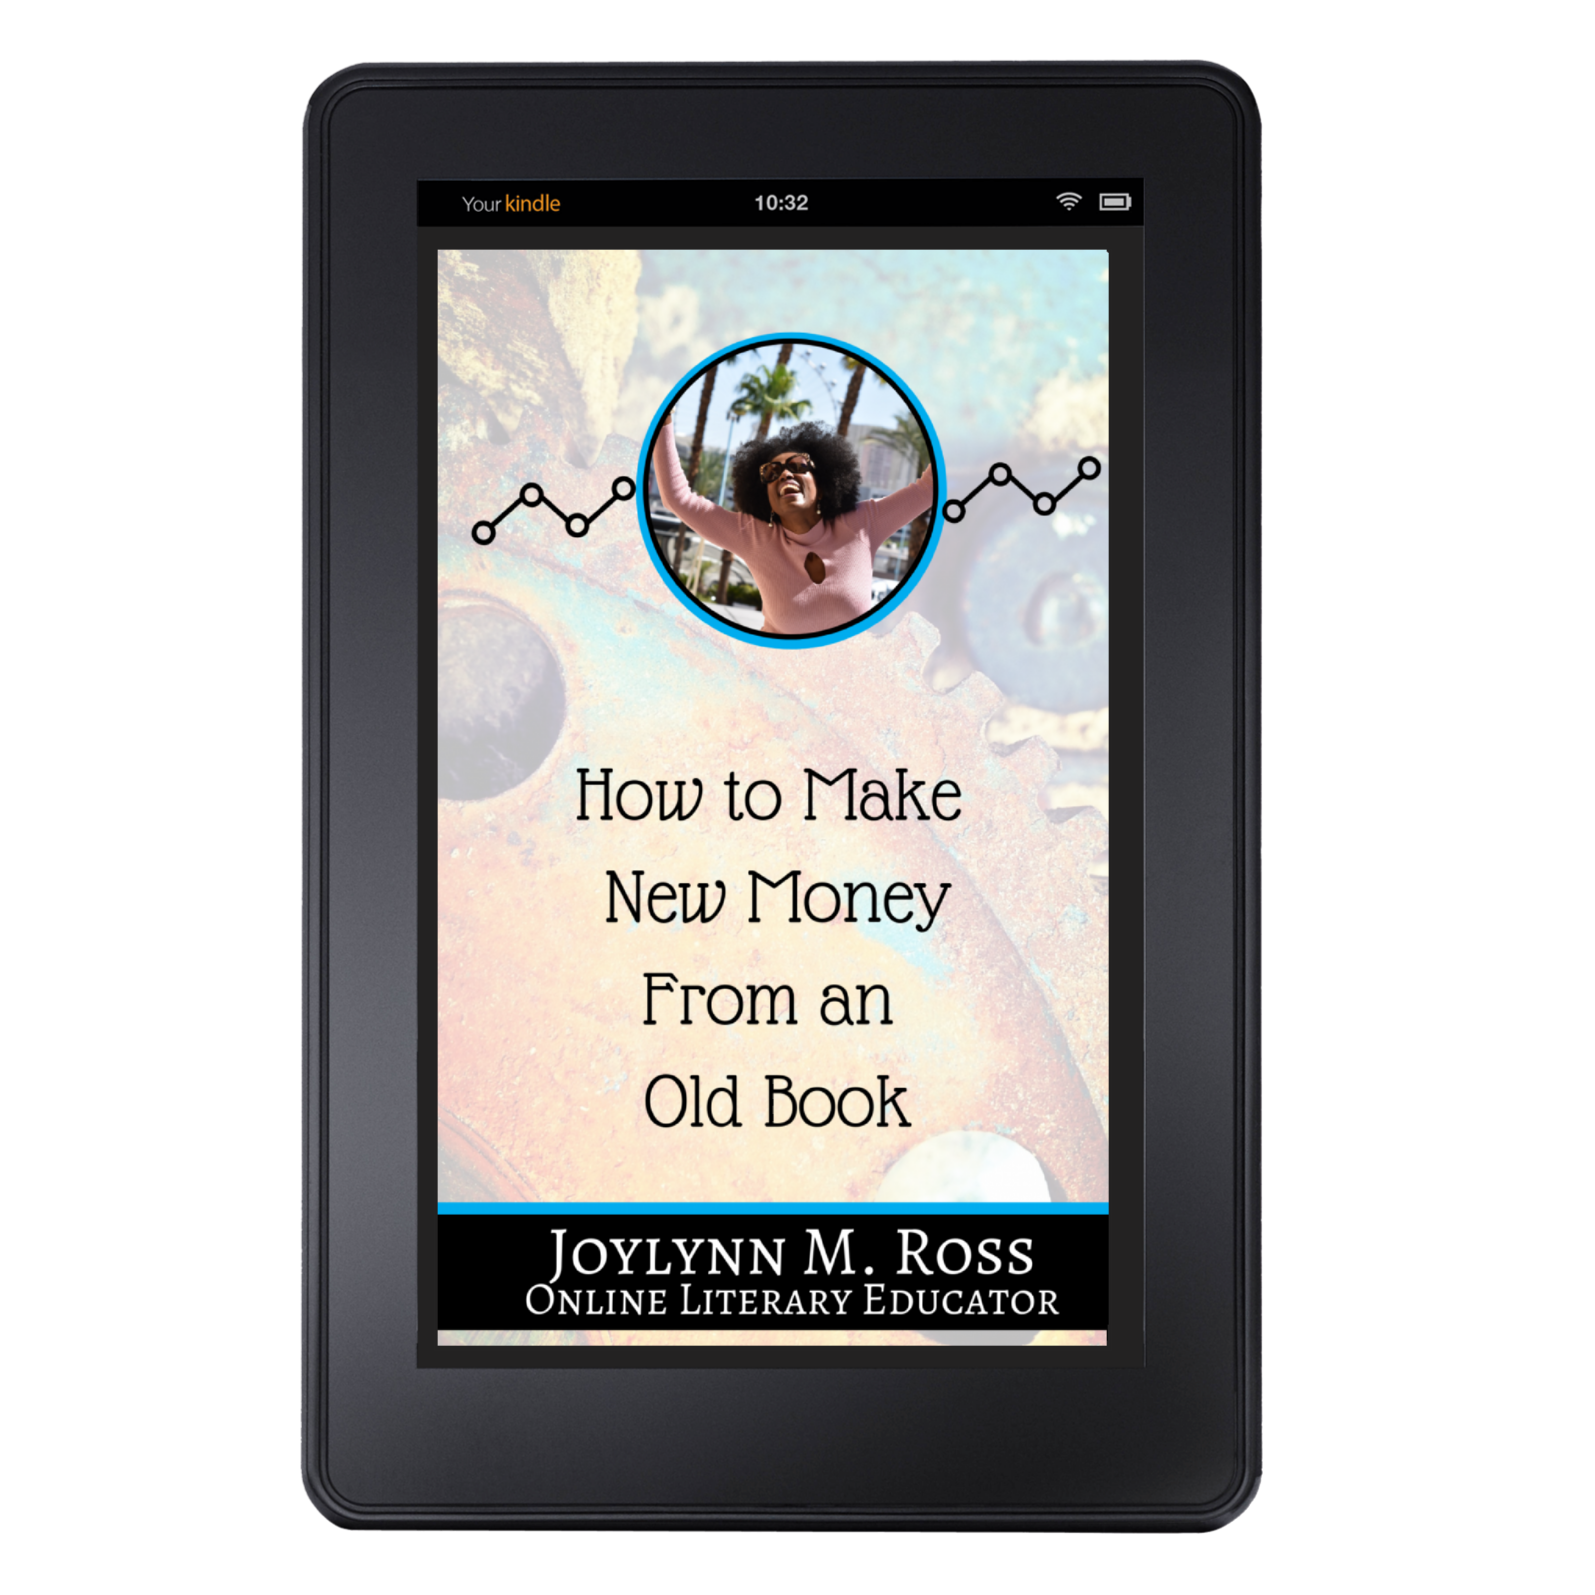 How to Make New Money From an Old Book | Joylynn M. Ross | Online Literary Educator | The Literary "Know-it-all"